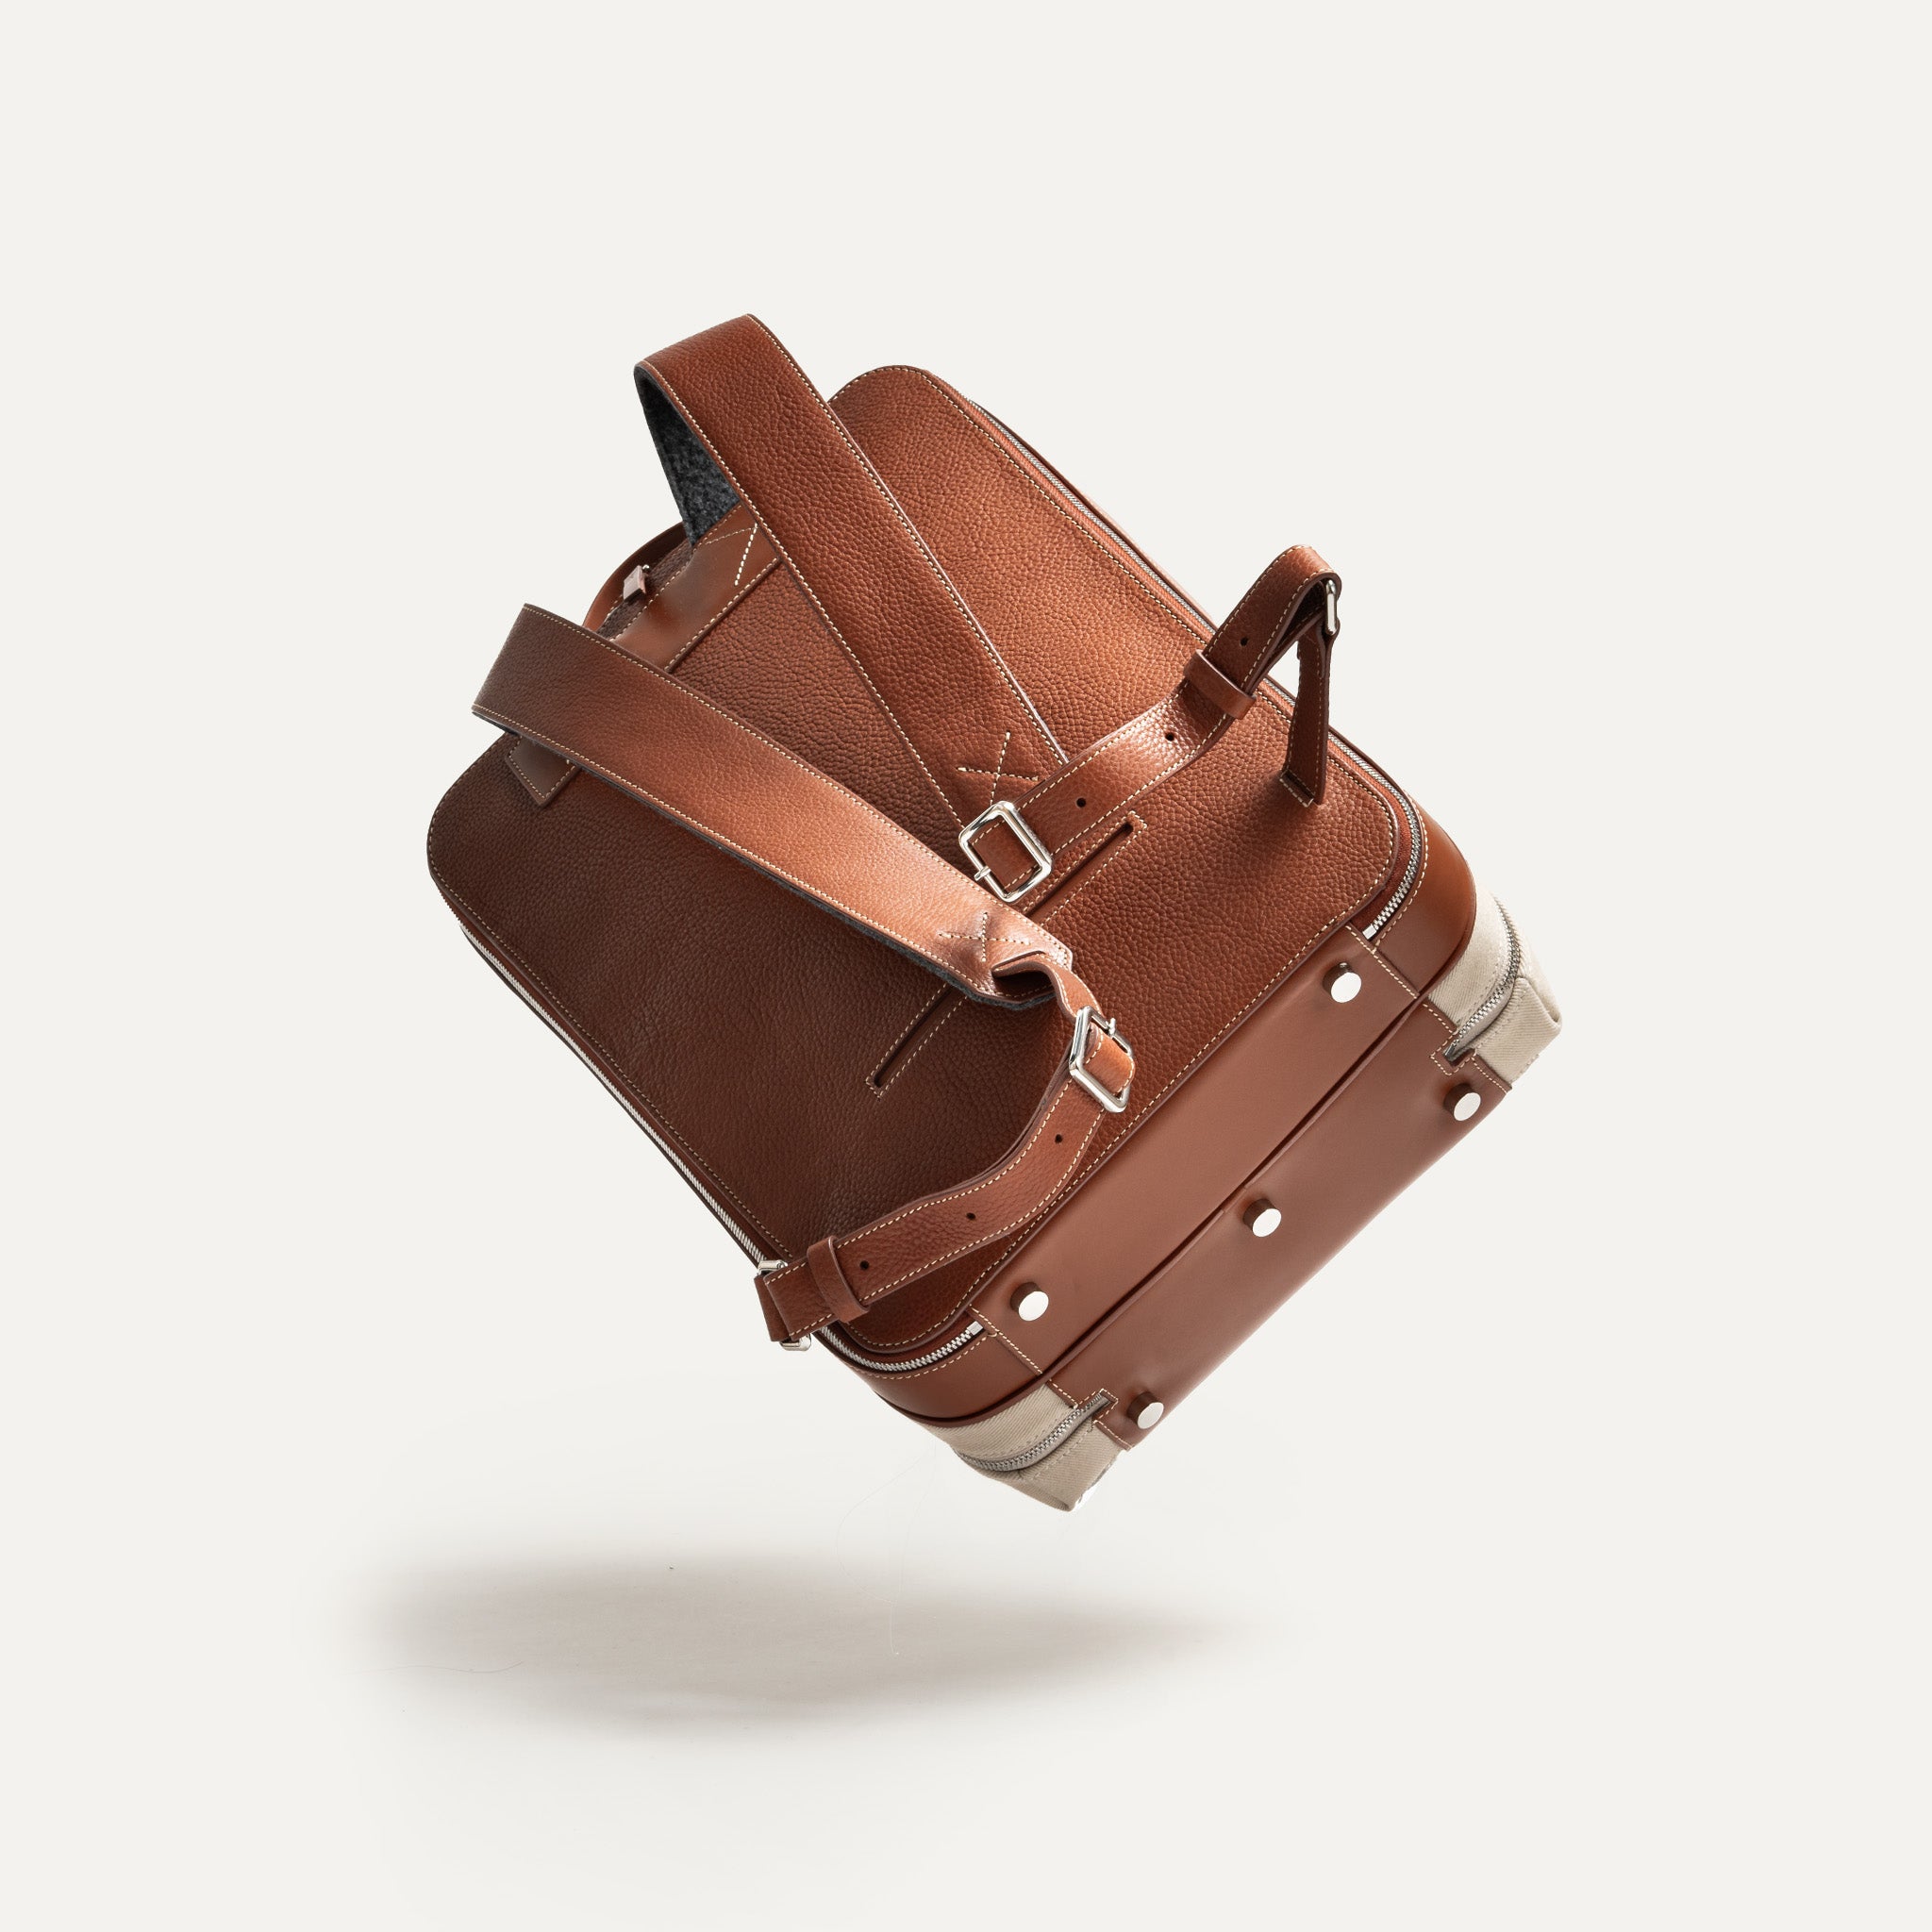 ANTOINE, Sand | lundi 36-hour Backpack in cotton and leather